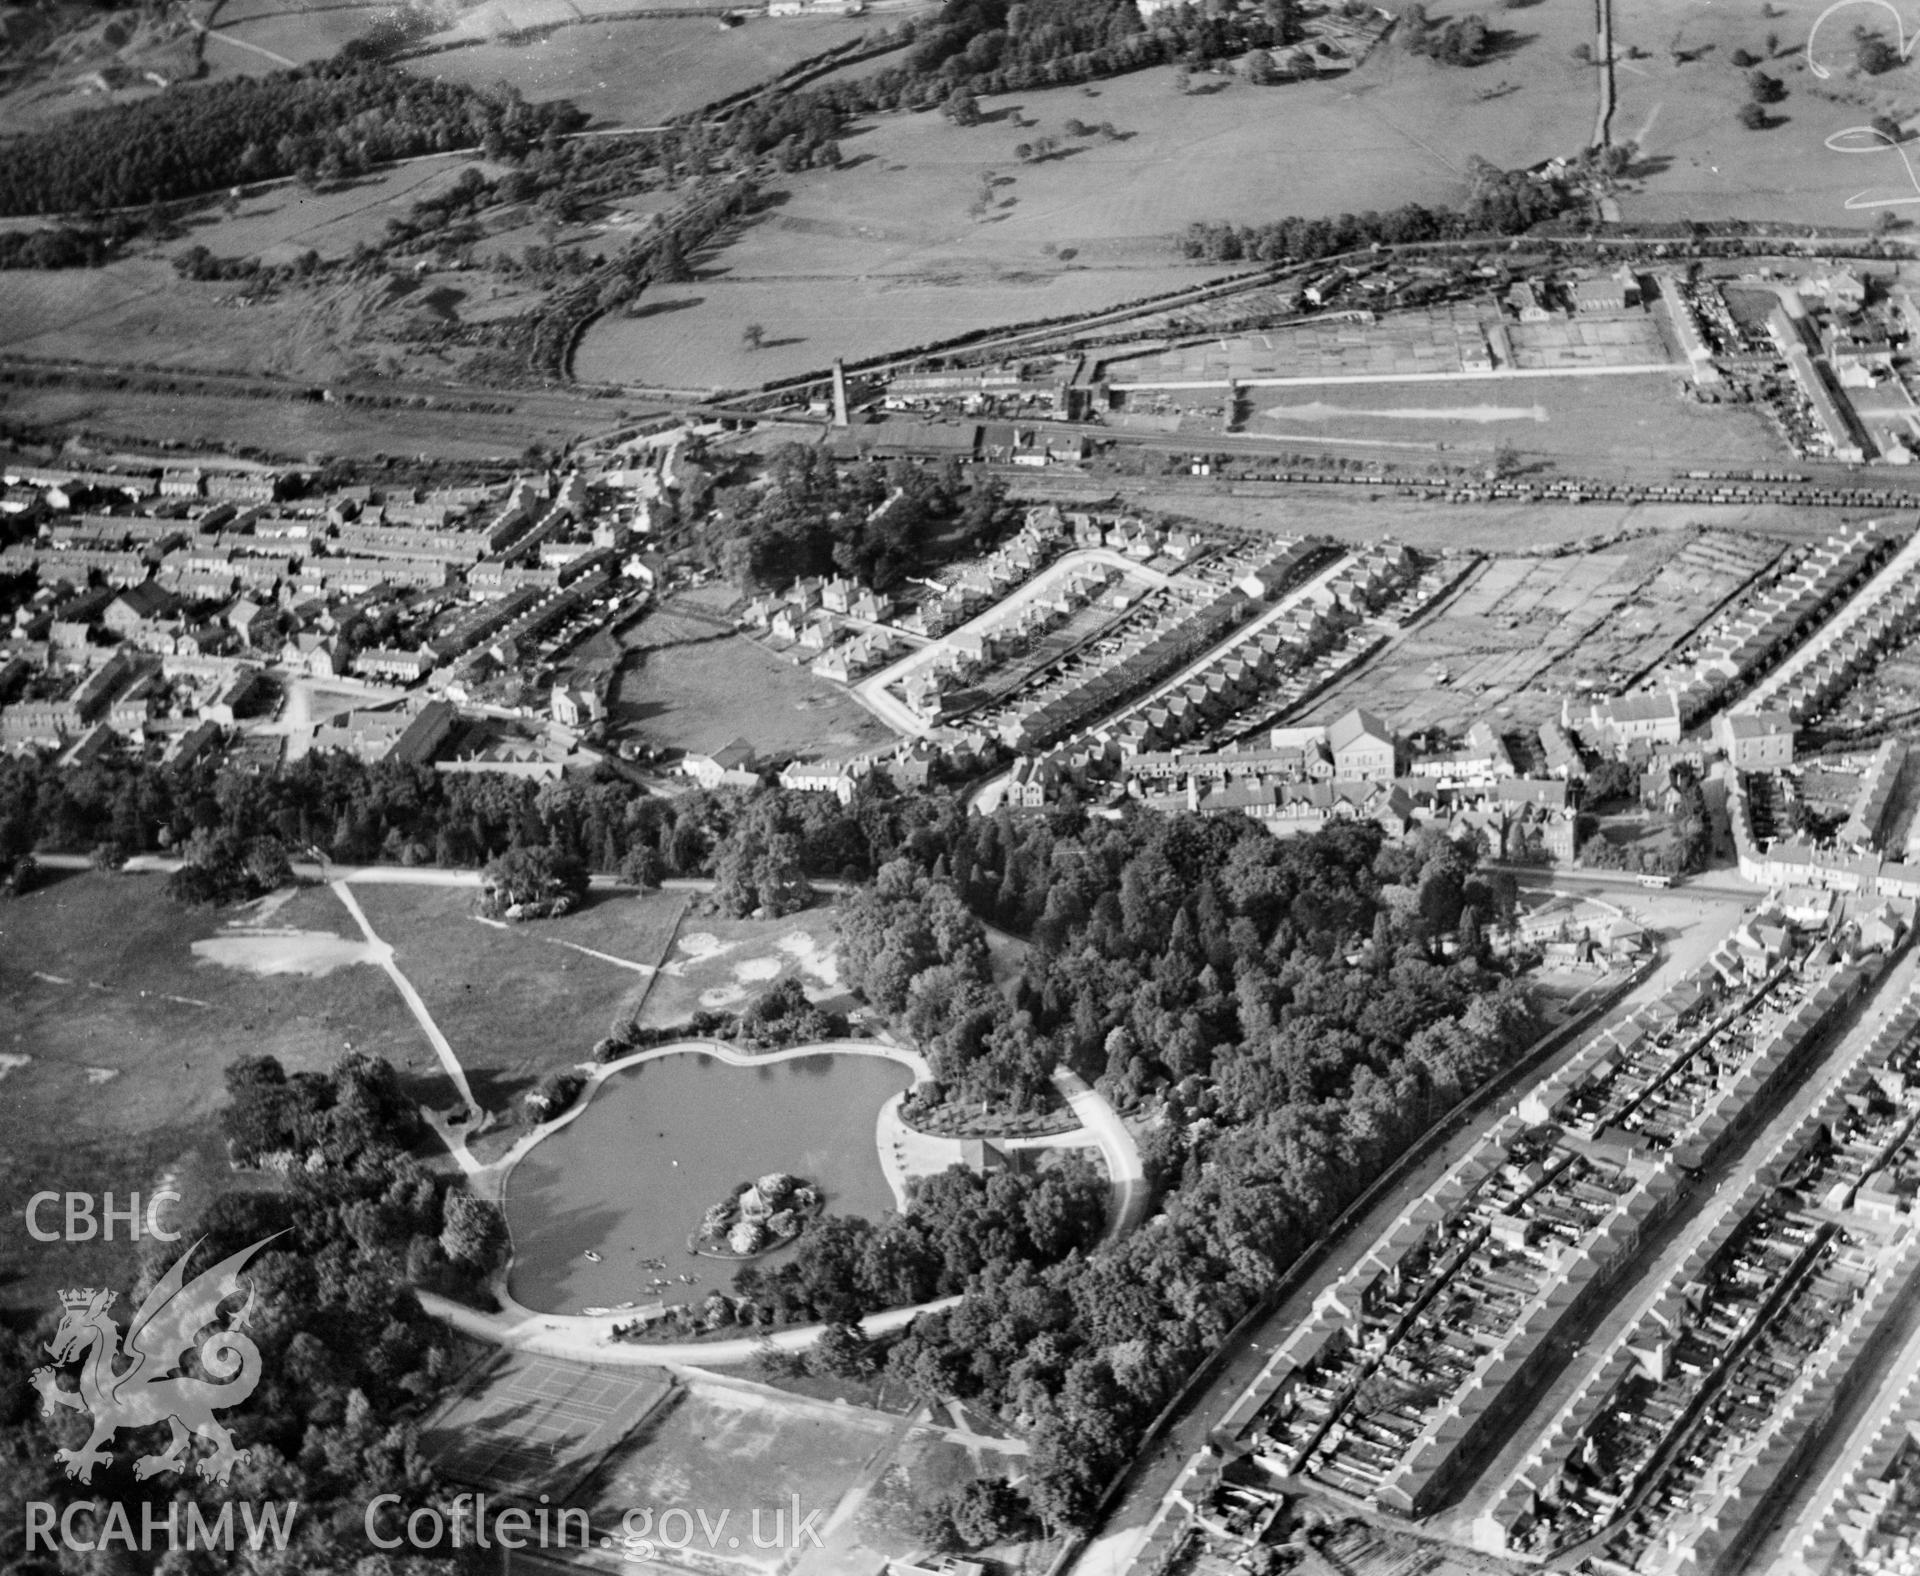 General view of Aberdare, showing park, oblique aerial view. 5?x4? black and white glass plate negative.